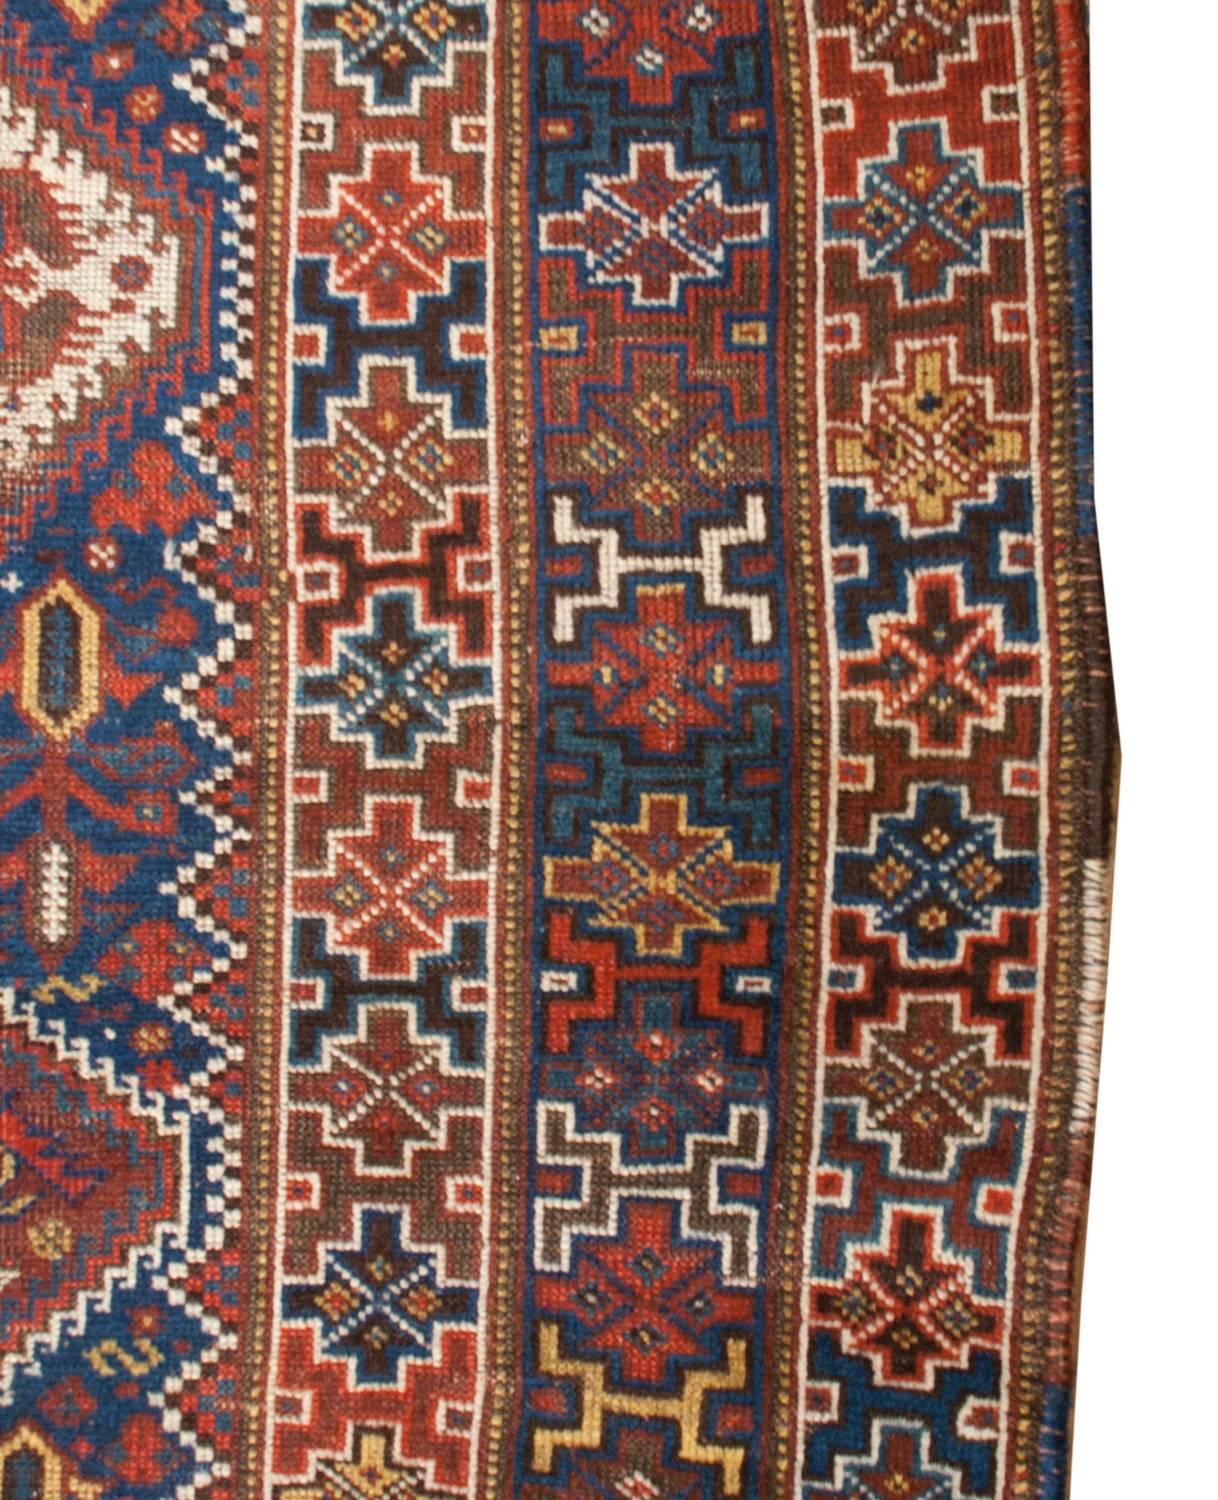 An exceptional 19th century Persian Ghashgaei rug with multiple diamonds in the field, some with intricately woven floral designs, and others with stylized figures with trees-of-life patterns. The border is fantastic, composed of three distinct